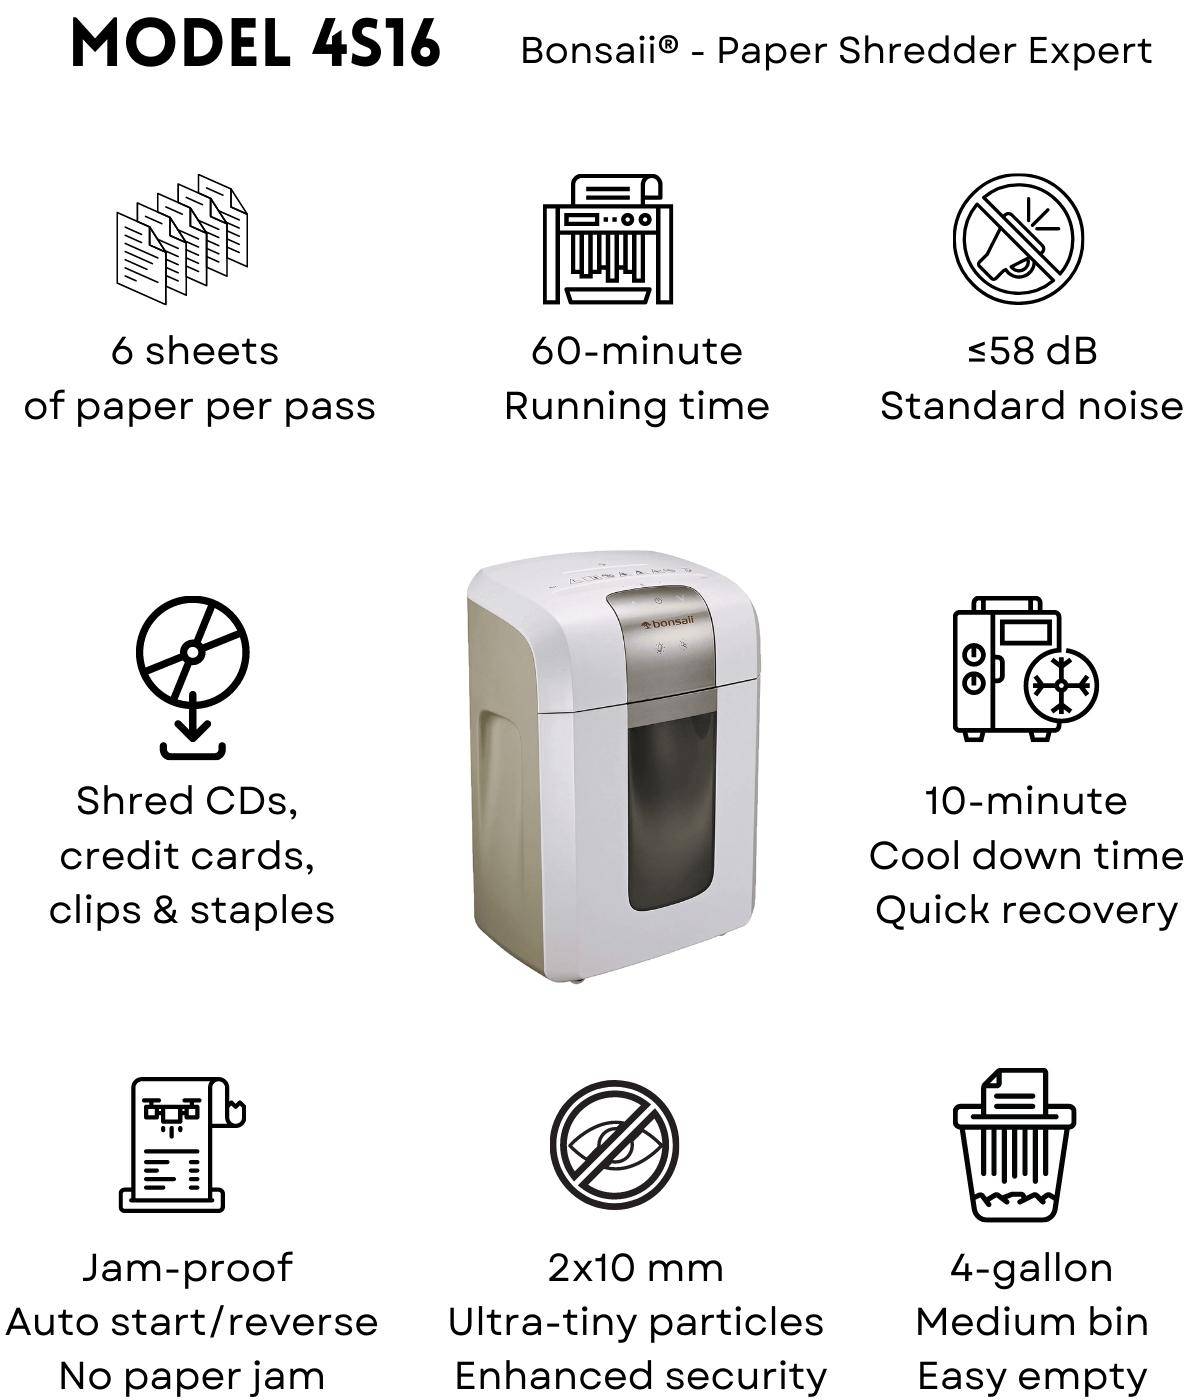 With the patented air cooling system, Shred longer than you expect. The heavy duty paper shredder for Office runs continuously for 60 mins without stopping, just needs 9-minute cooldown time, ideal paper shredder for office, small office and home office use Shreds 6 sheets per pass into 5/64'' X 25/64'' (2mm x 10mm) micro-cut particles (Security Level P-5) Shreds credit cards, CDs, staples and small paper clips as well 58dB low-noise offers you a quiet and smooth shredding experience. And with 4 removable and lockable casters for easy mobility Jam protection system with auto start and auto reverse to avoid the frustration of paper jams. Overheating and overloading protection technology to help maintain your shredder and extend its lifespan 4.2-gallon pull-out bin for shreds with a 0.37-gallons separate small bin for CD and credit card pieces collection, the transparent window makes it easy to see when to empty the bin